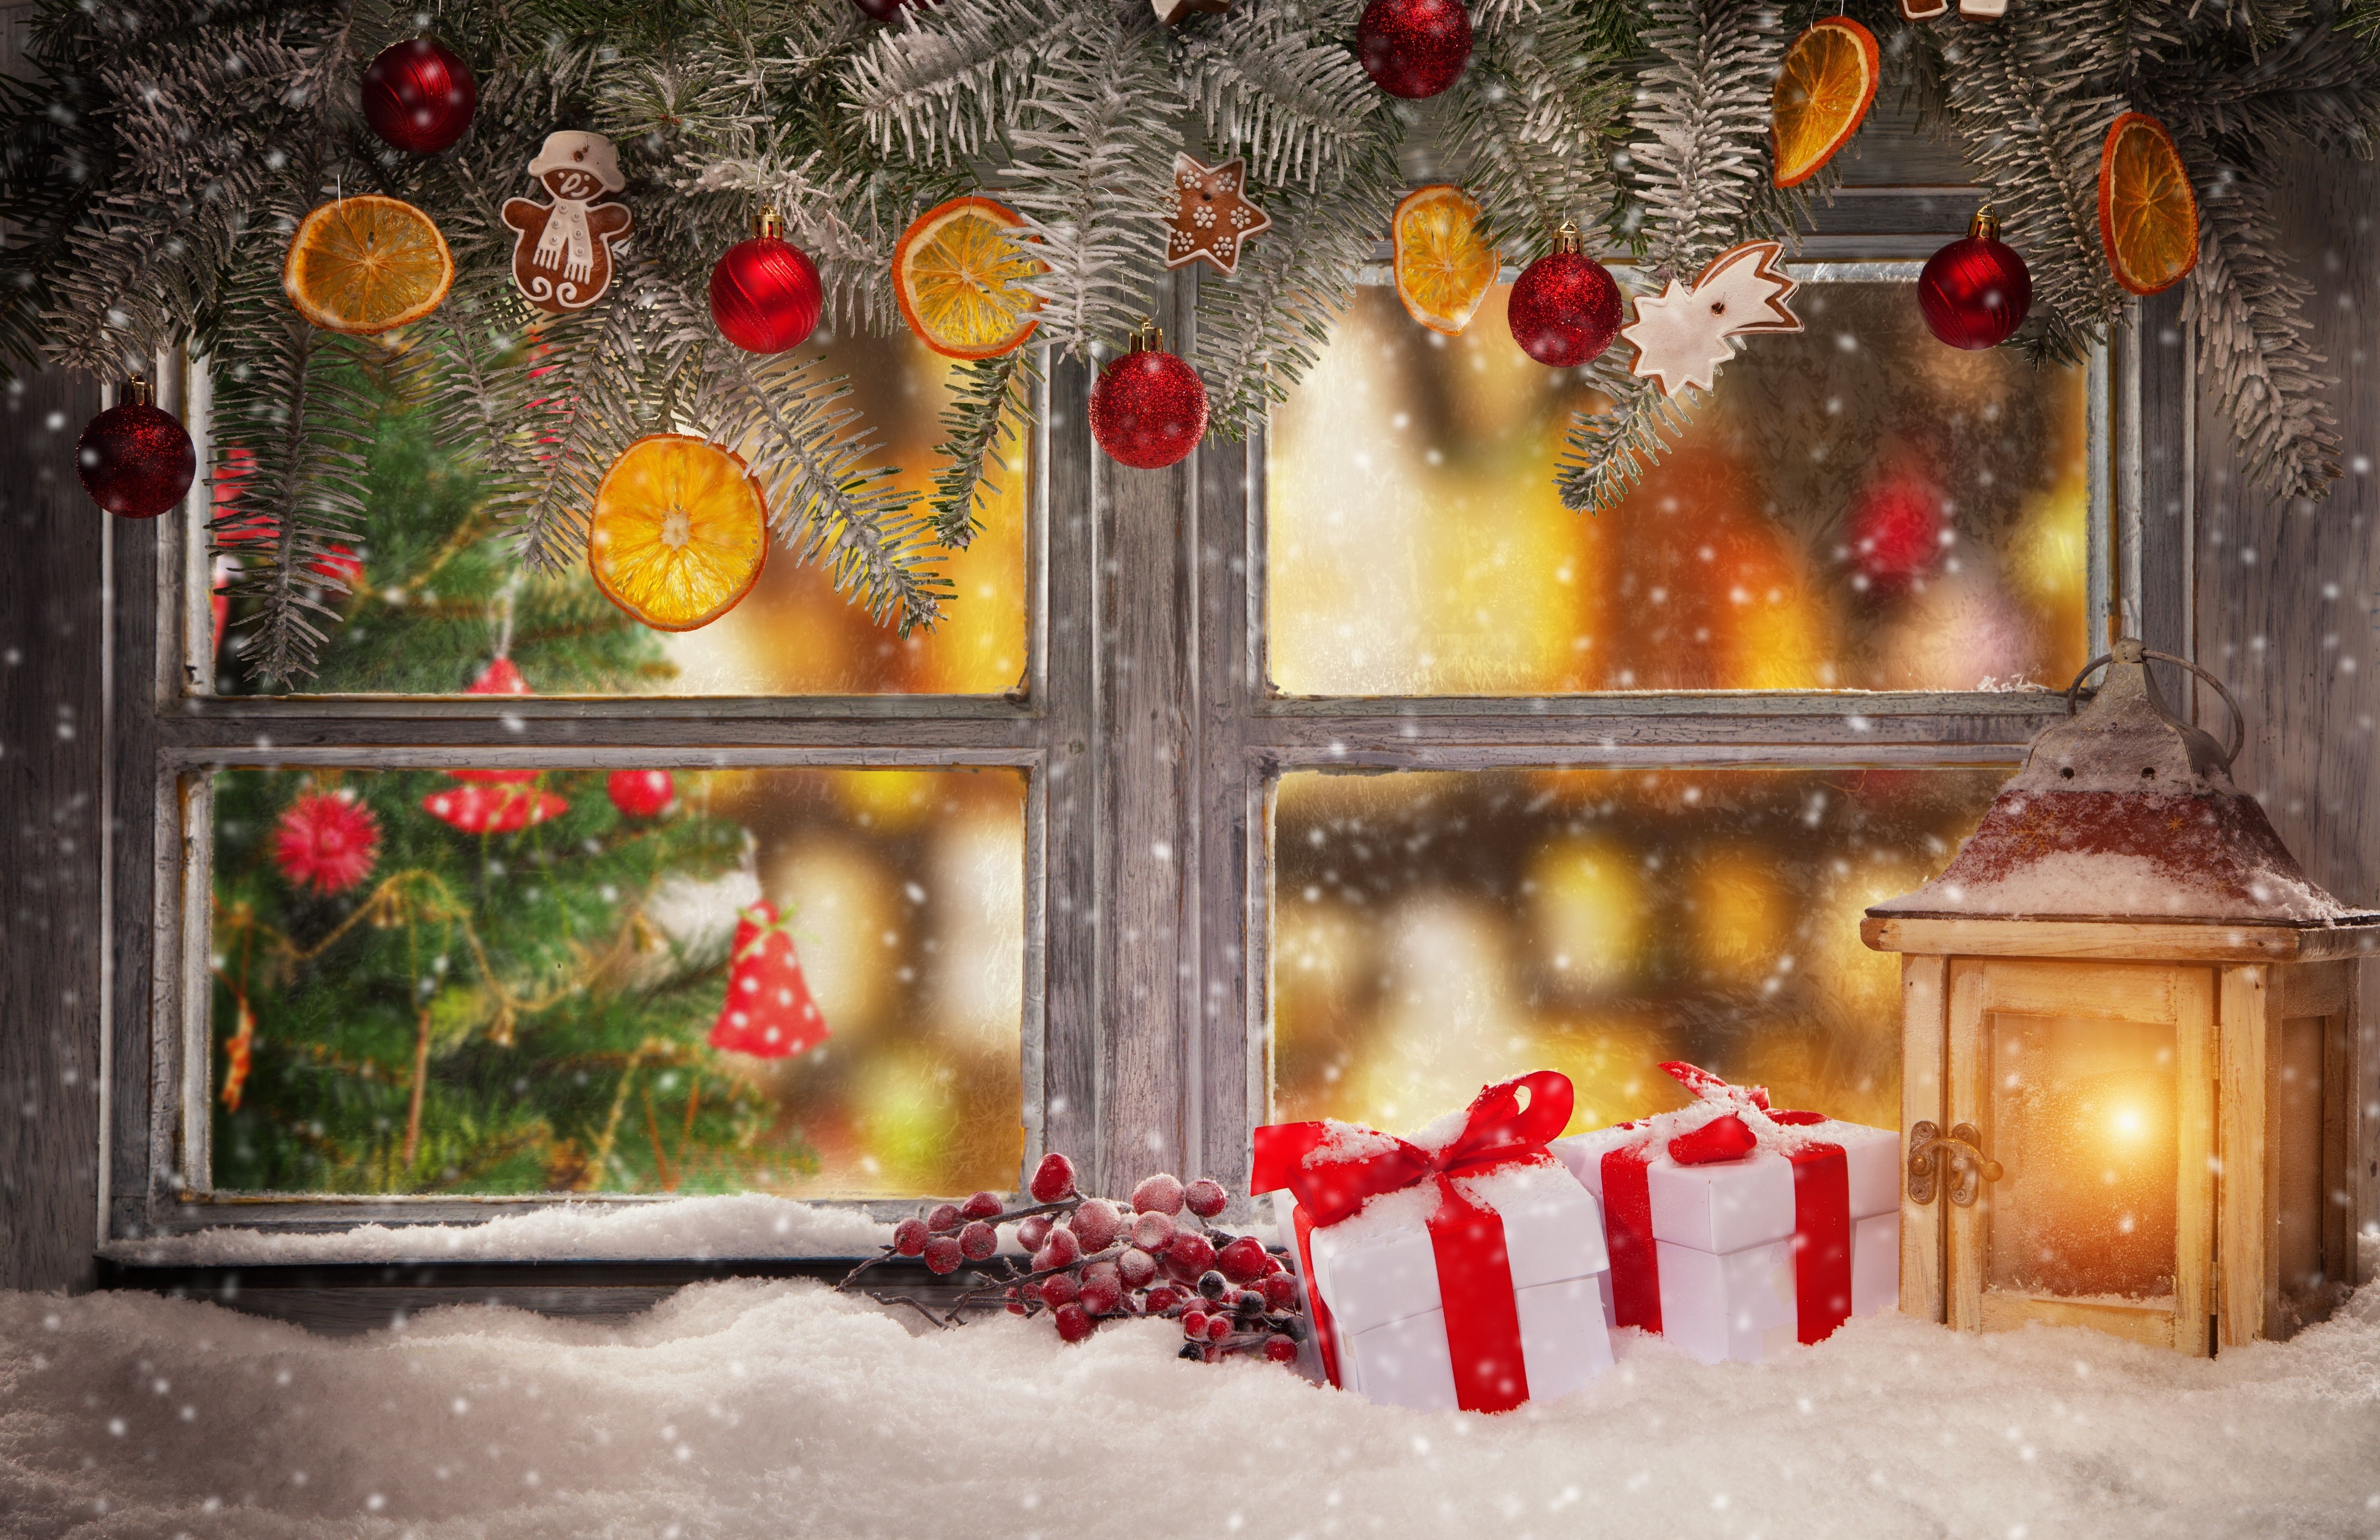 Wallpaper. New Year. photo. picture. holiday, New year, Christmas, window, winter